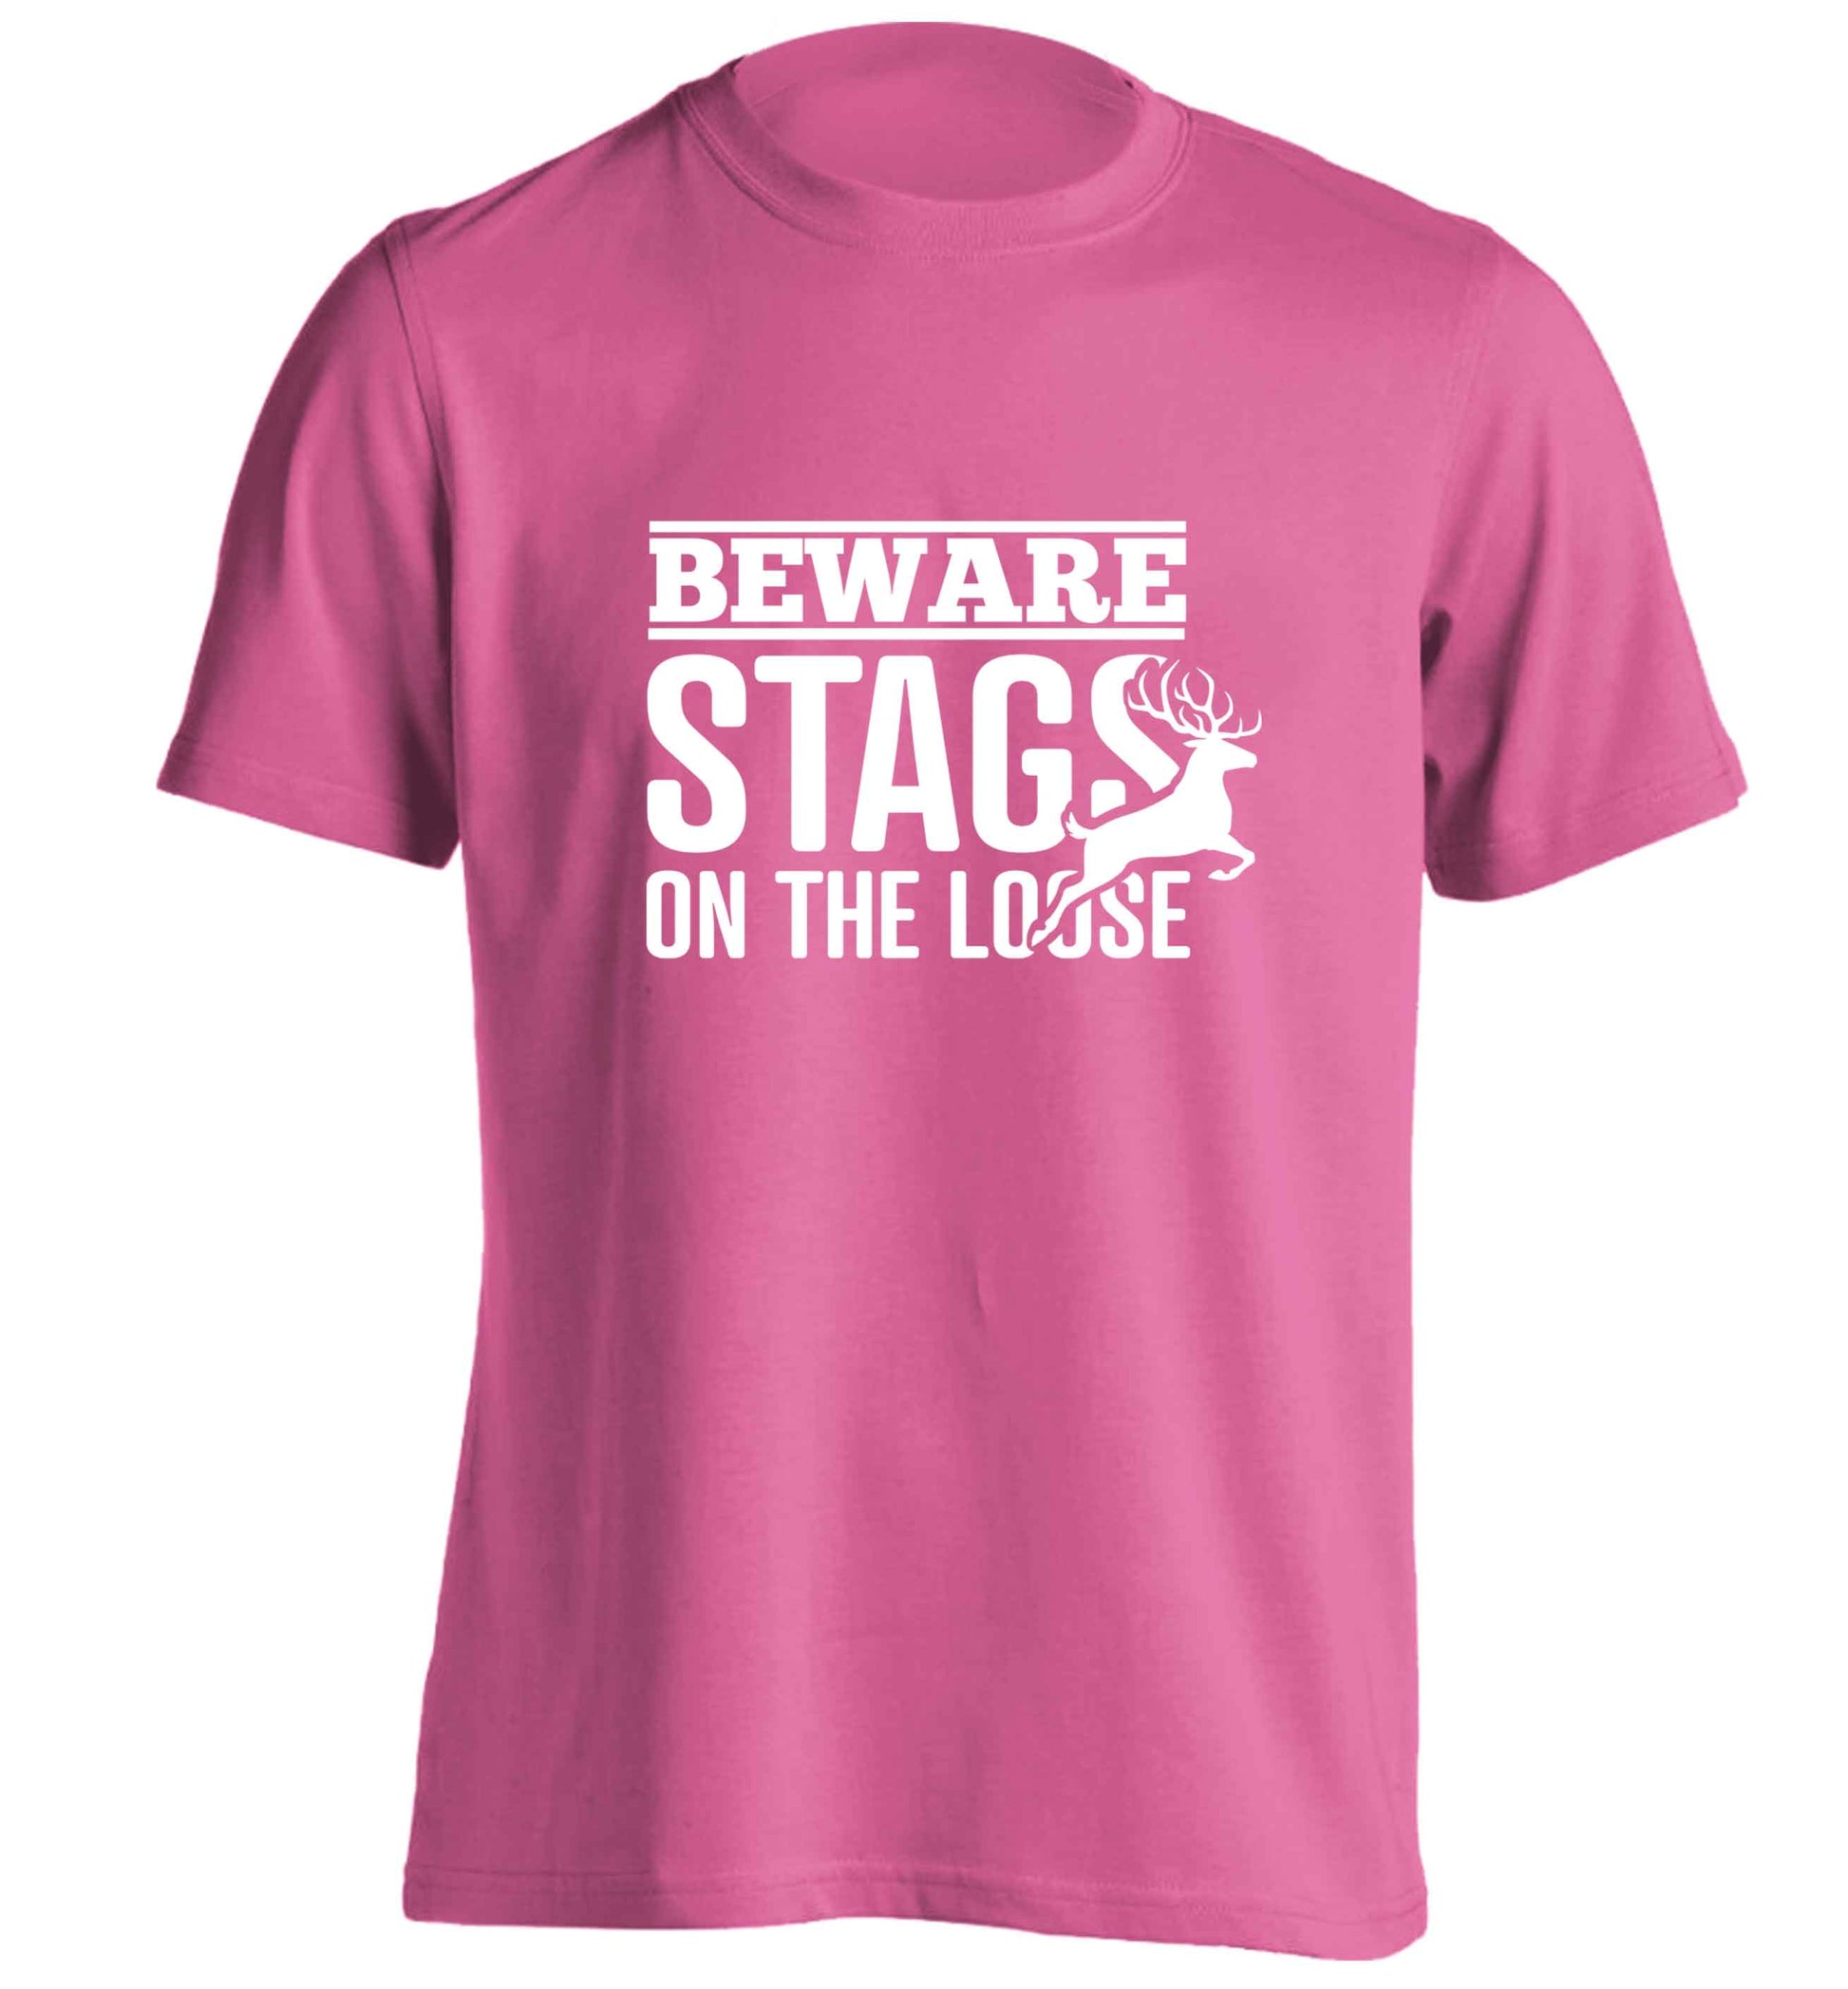 Beware stags on the loose adults unisex pink Tshirt 2XL